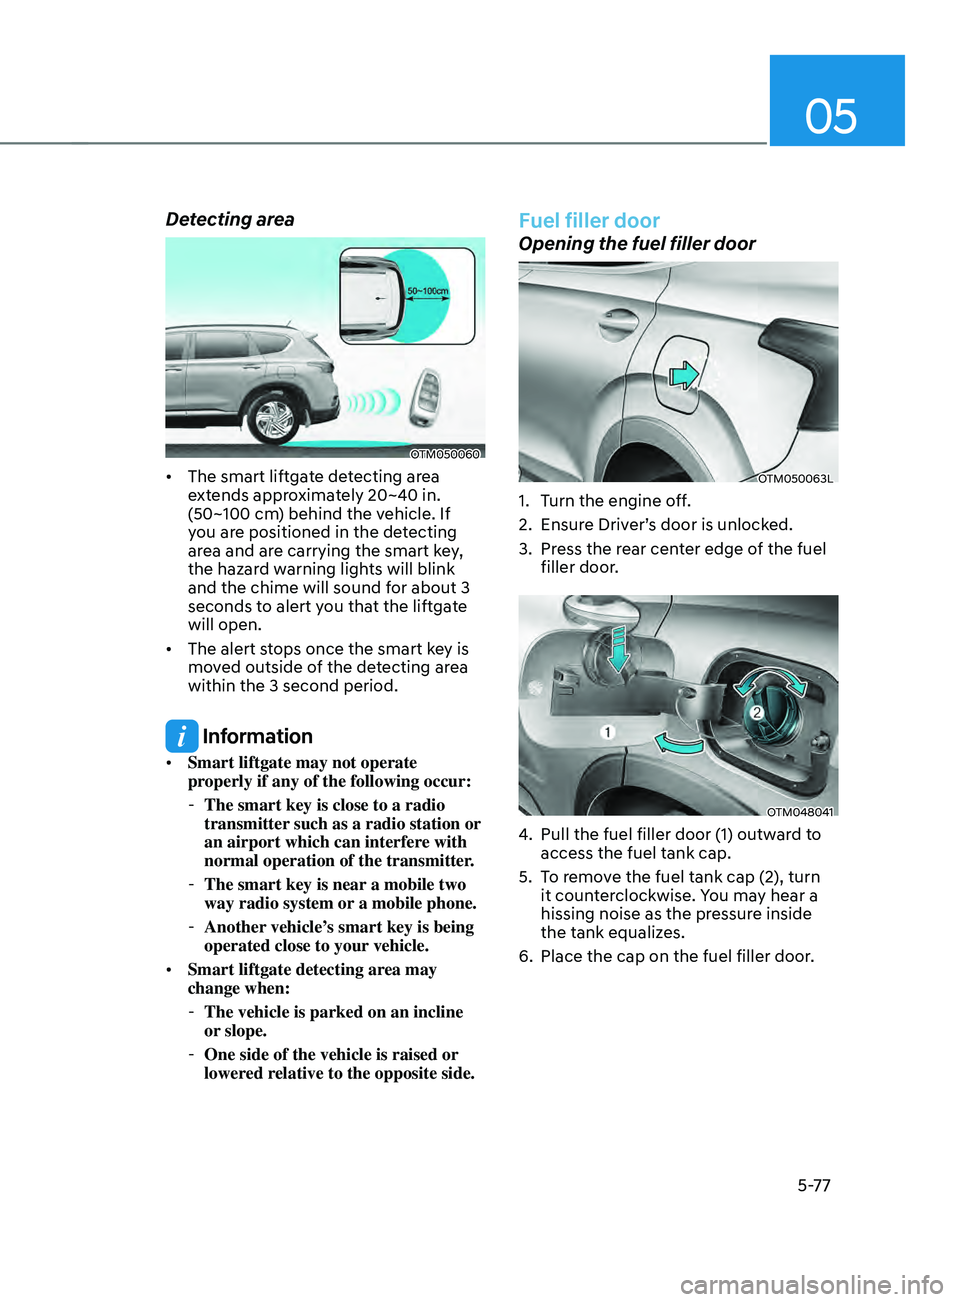 HYUNDAI SANTA FE 2021  Owners Manual 05
5-77
Detecting area
OTM050060
•	The smart liftgate detecting area 
extends approximately 20~40 in. 
(50~100 cm) behind the vehicle. If 
you are positioned in the detecting 
area and are carrying 